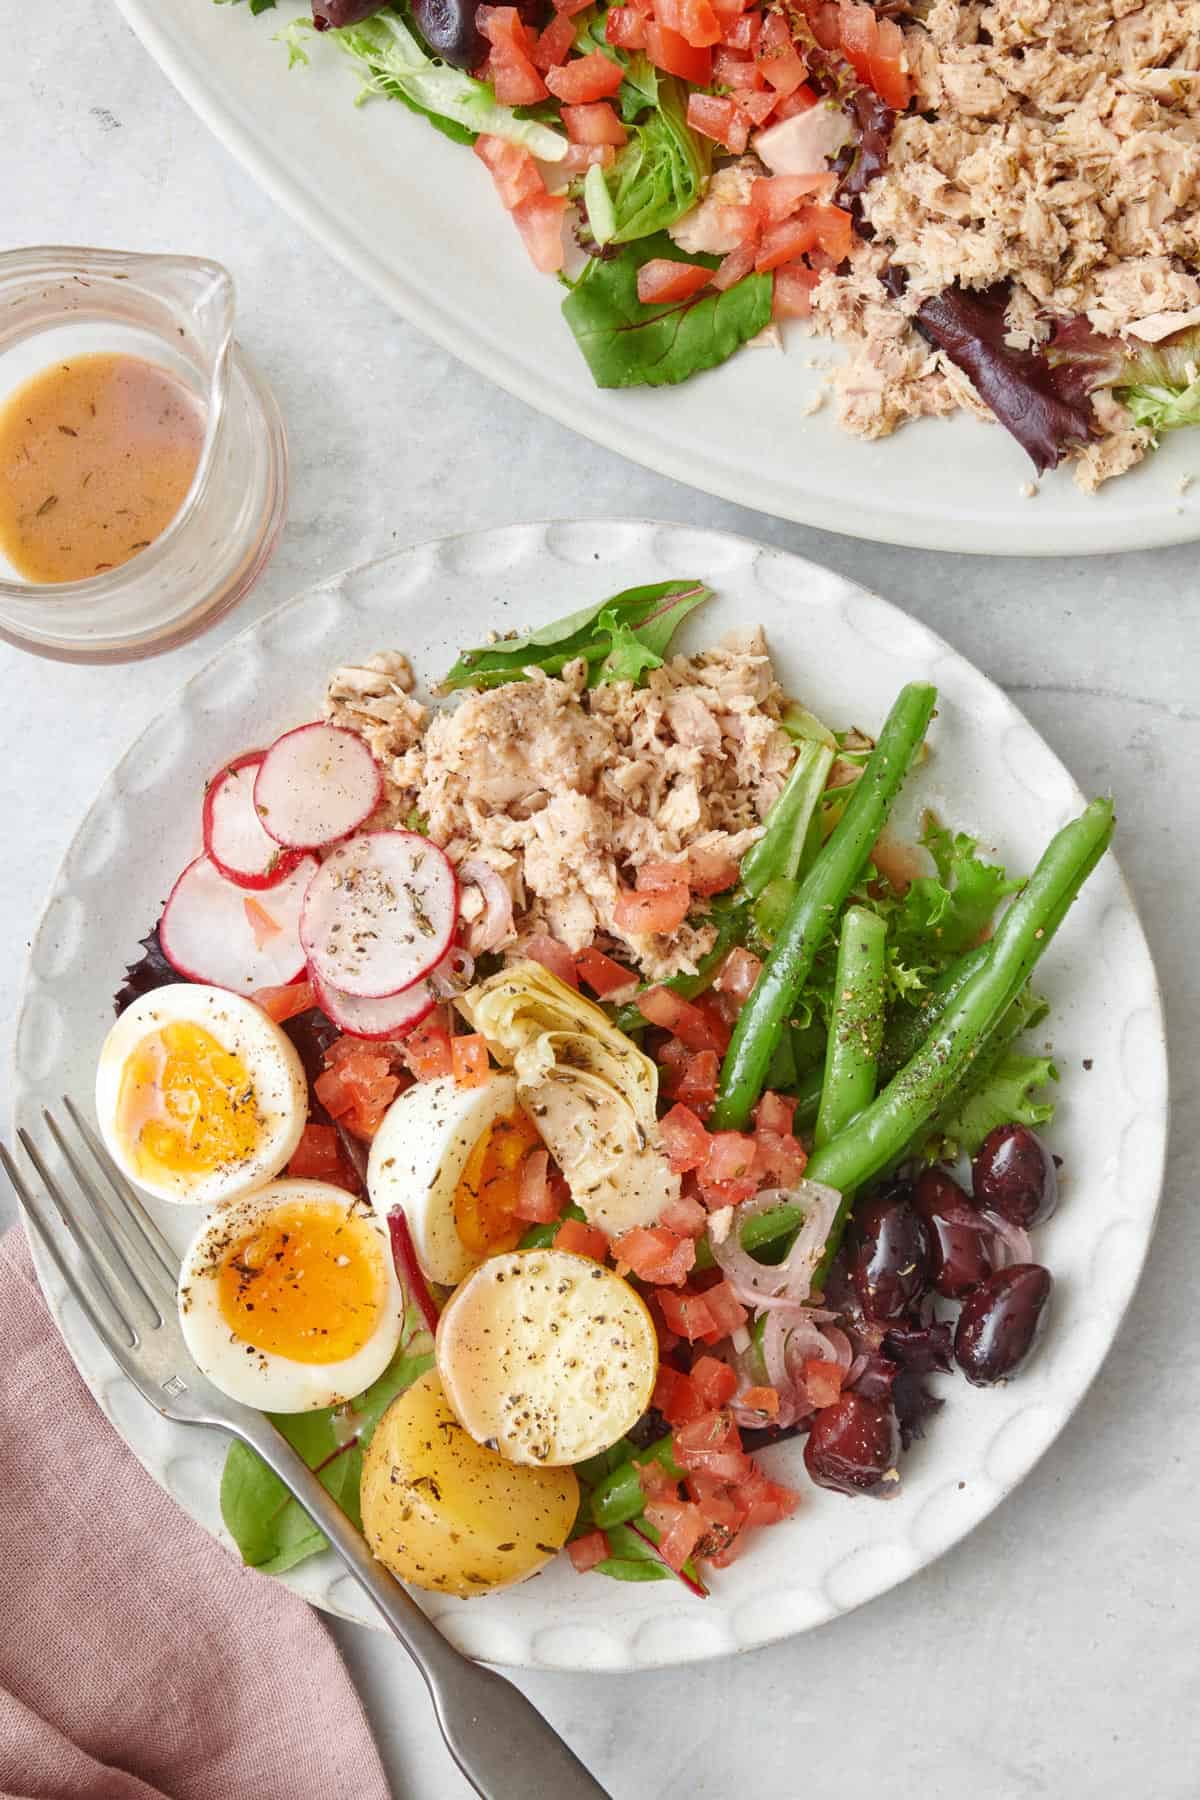 Serving of tuna nicoise salad on a small plate with serving platter nearby.